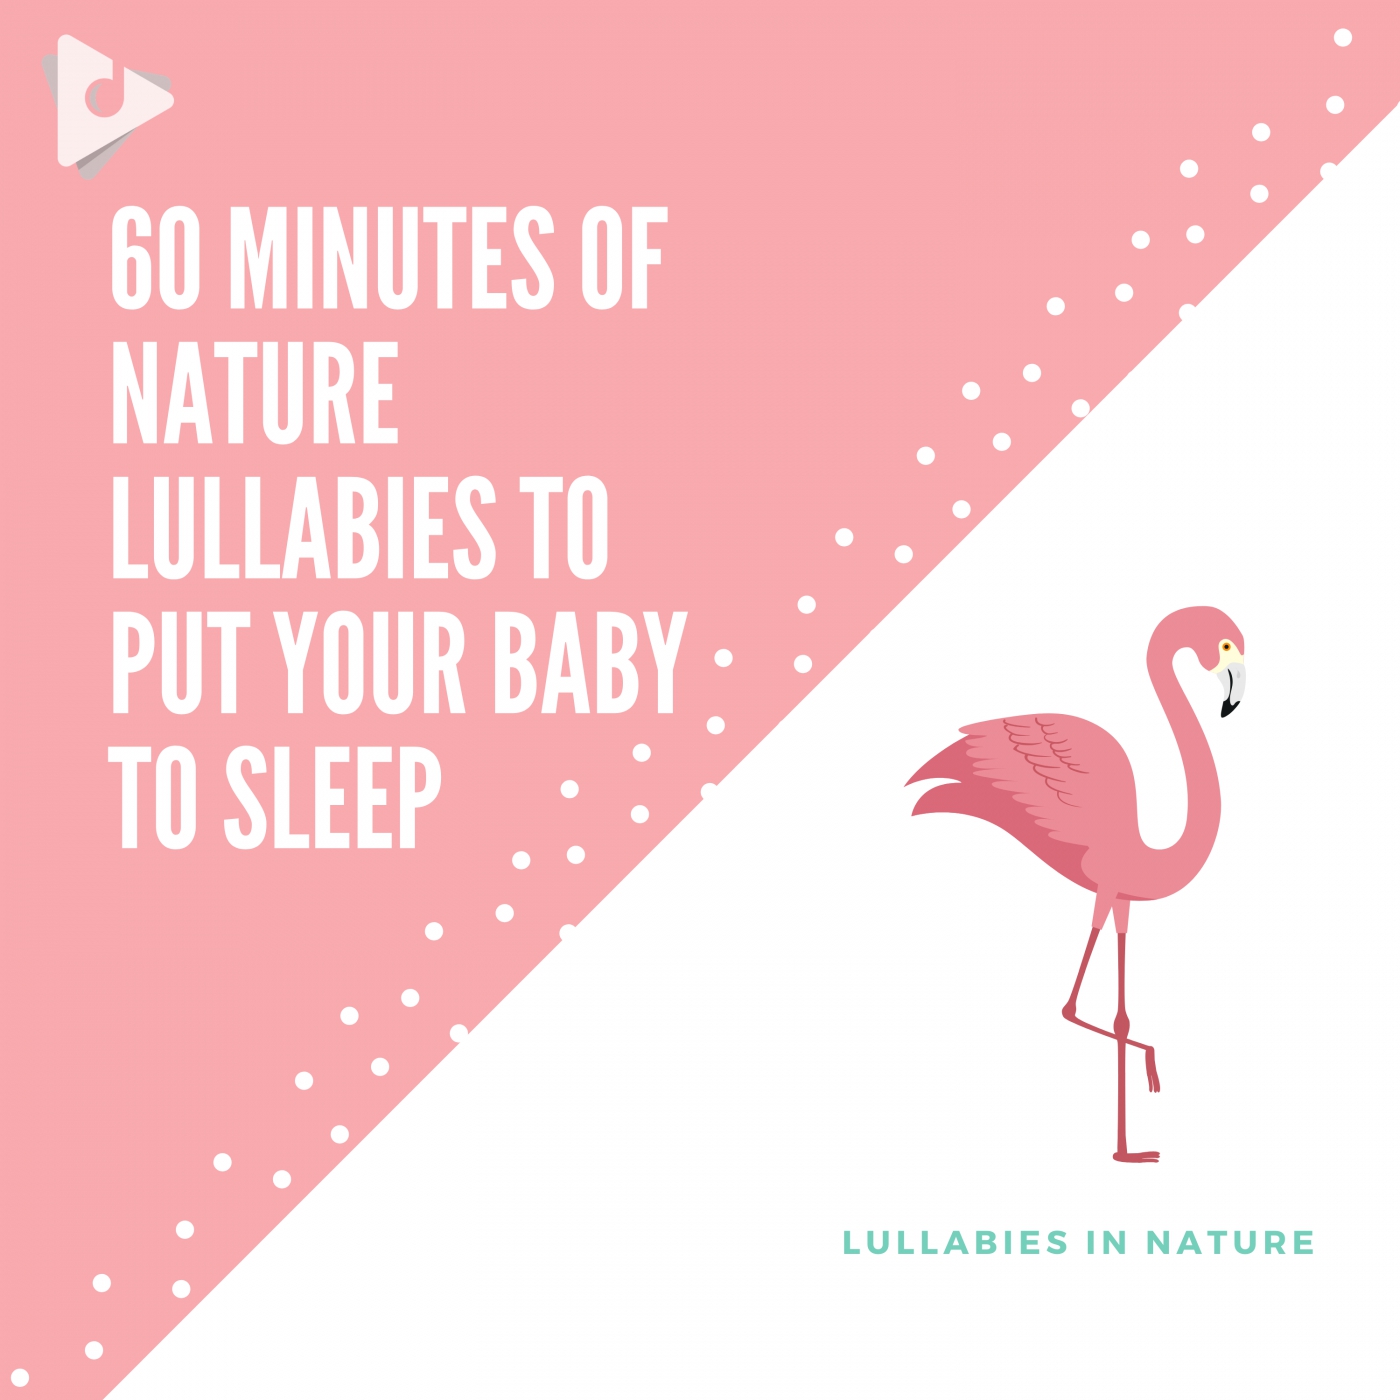 60 Minutes of Nature Lullabies to Put Your Baby to Sleep